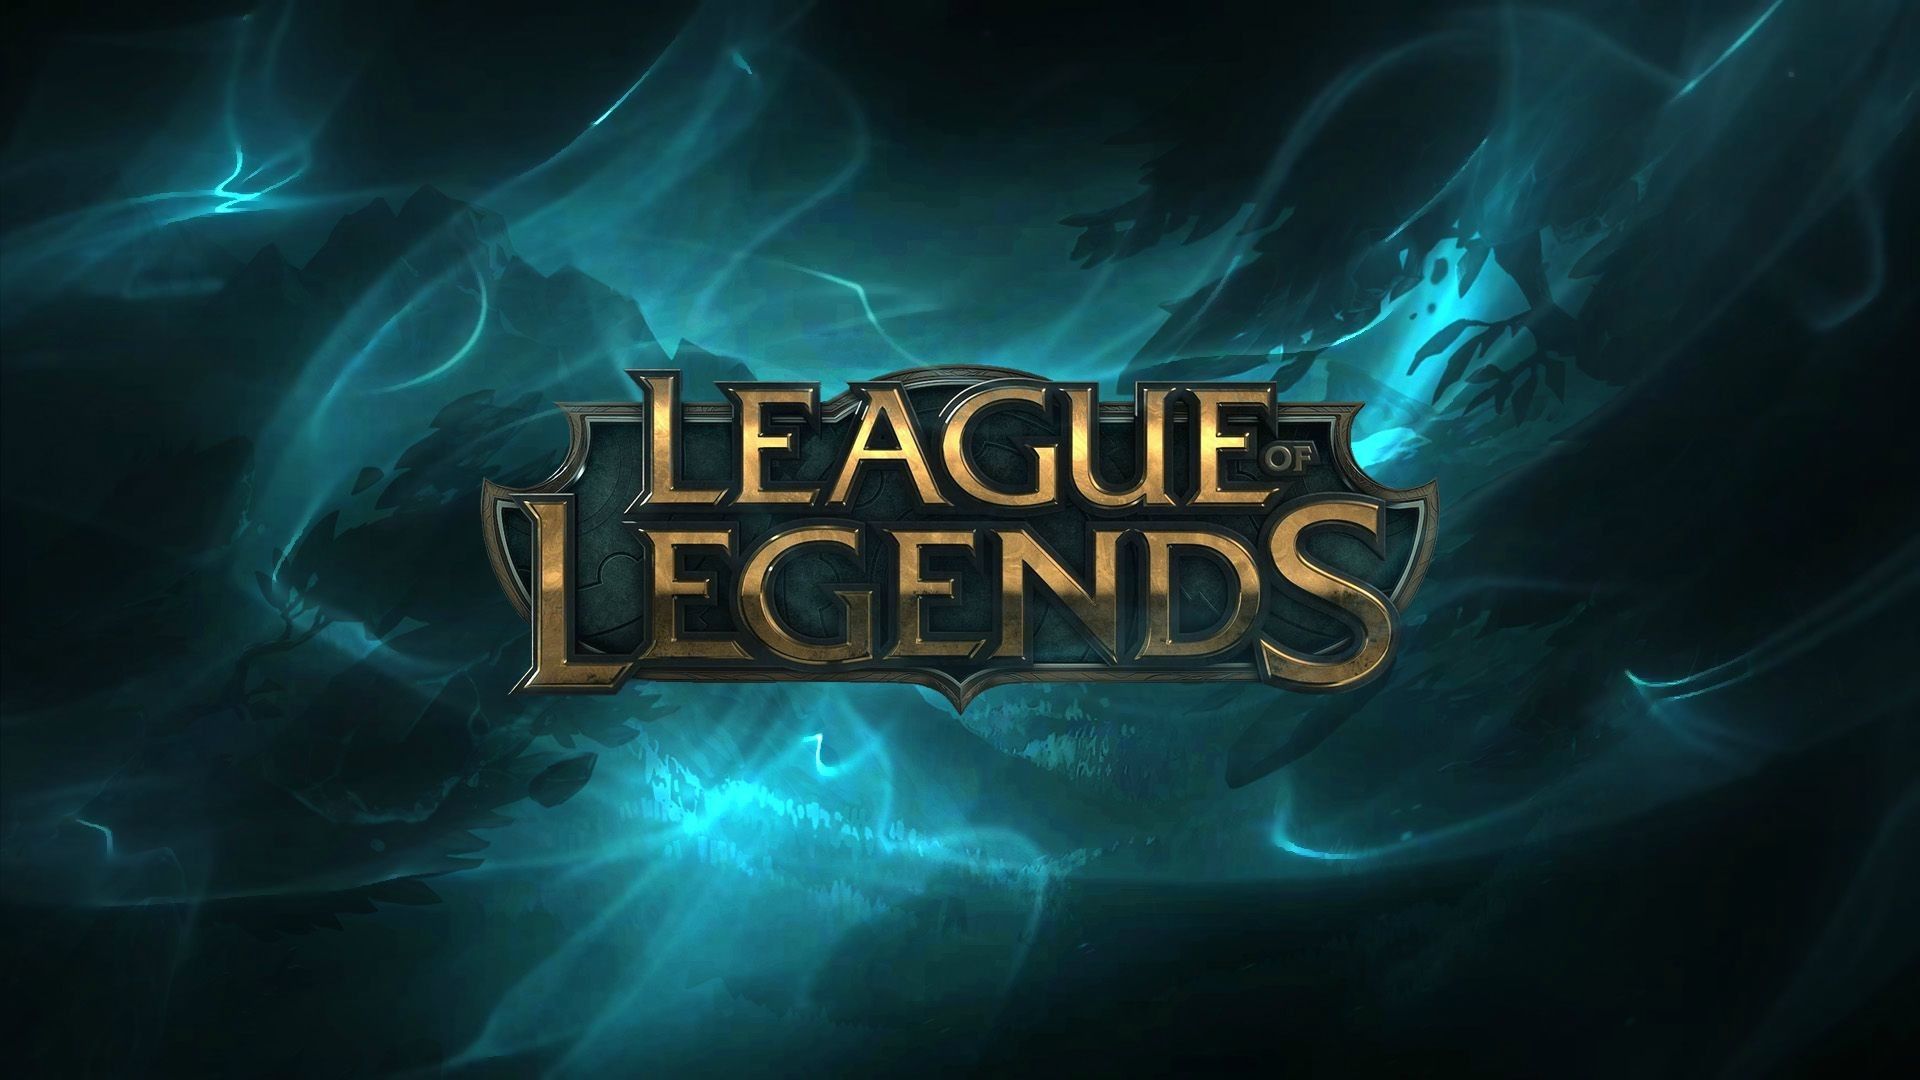 The Legends Wallpapers